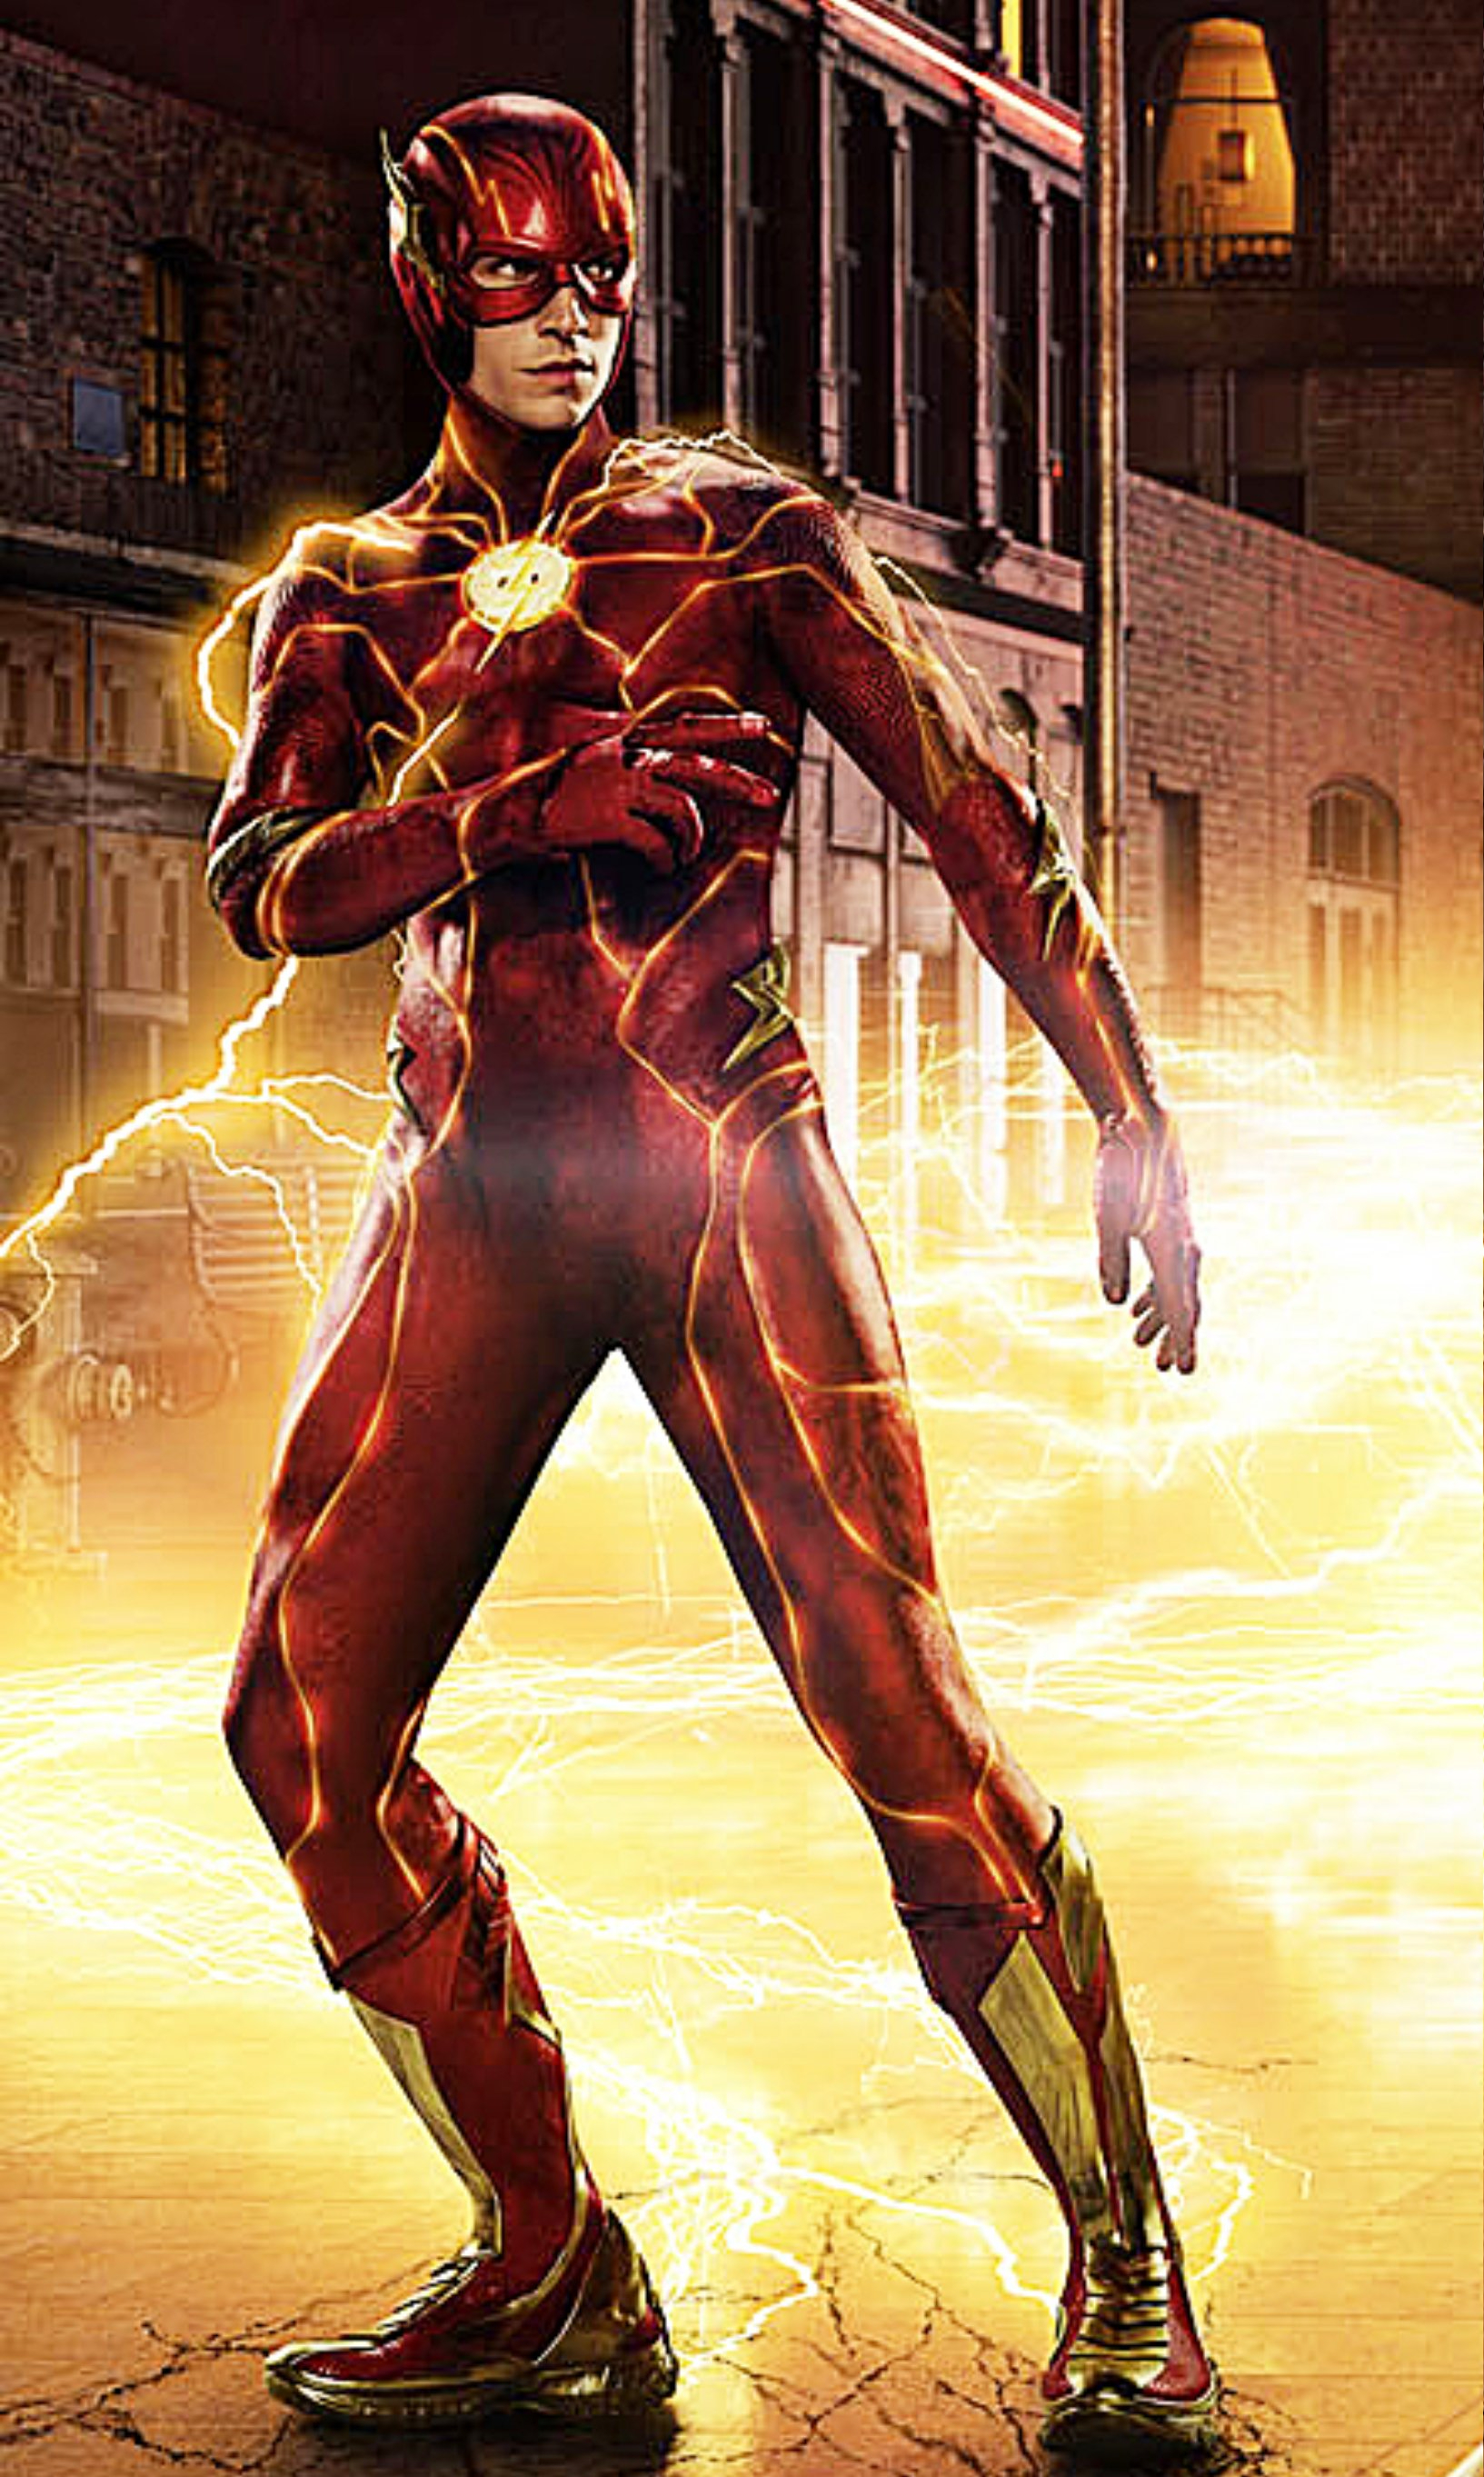 The Flash (from draw it too tutorial)